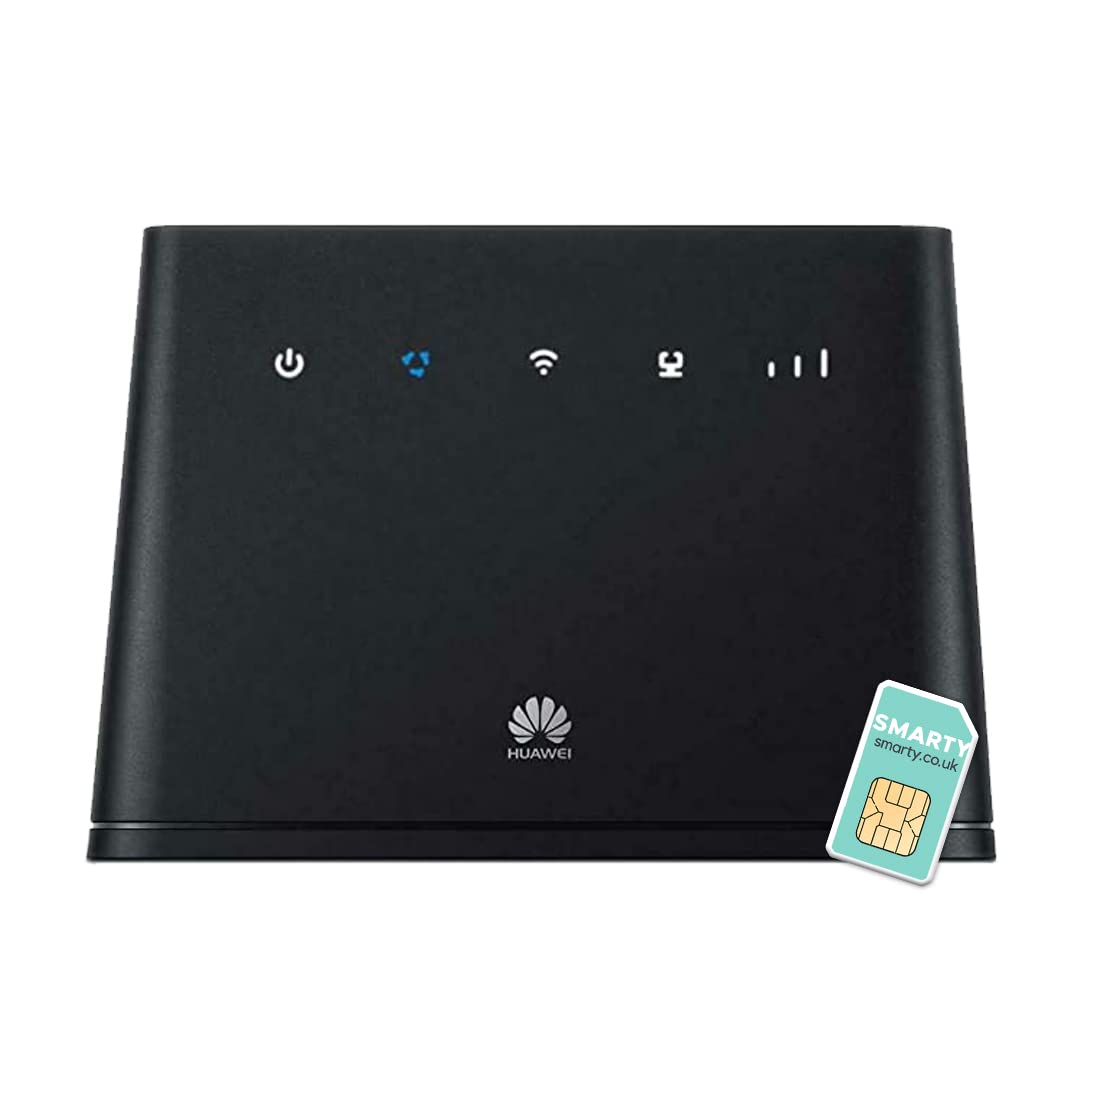 Huawei B311-4G/ LTE 150 Mbps Mobile Wi-Fi Router, Unlocked to All Networks- Genuine UK Warranty stock with FREE SMARTY SIM Card- Black